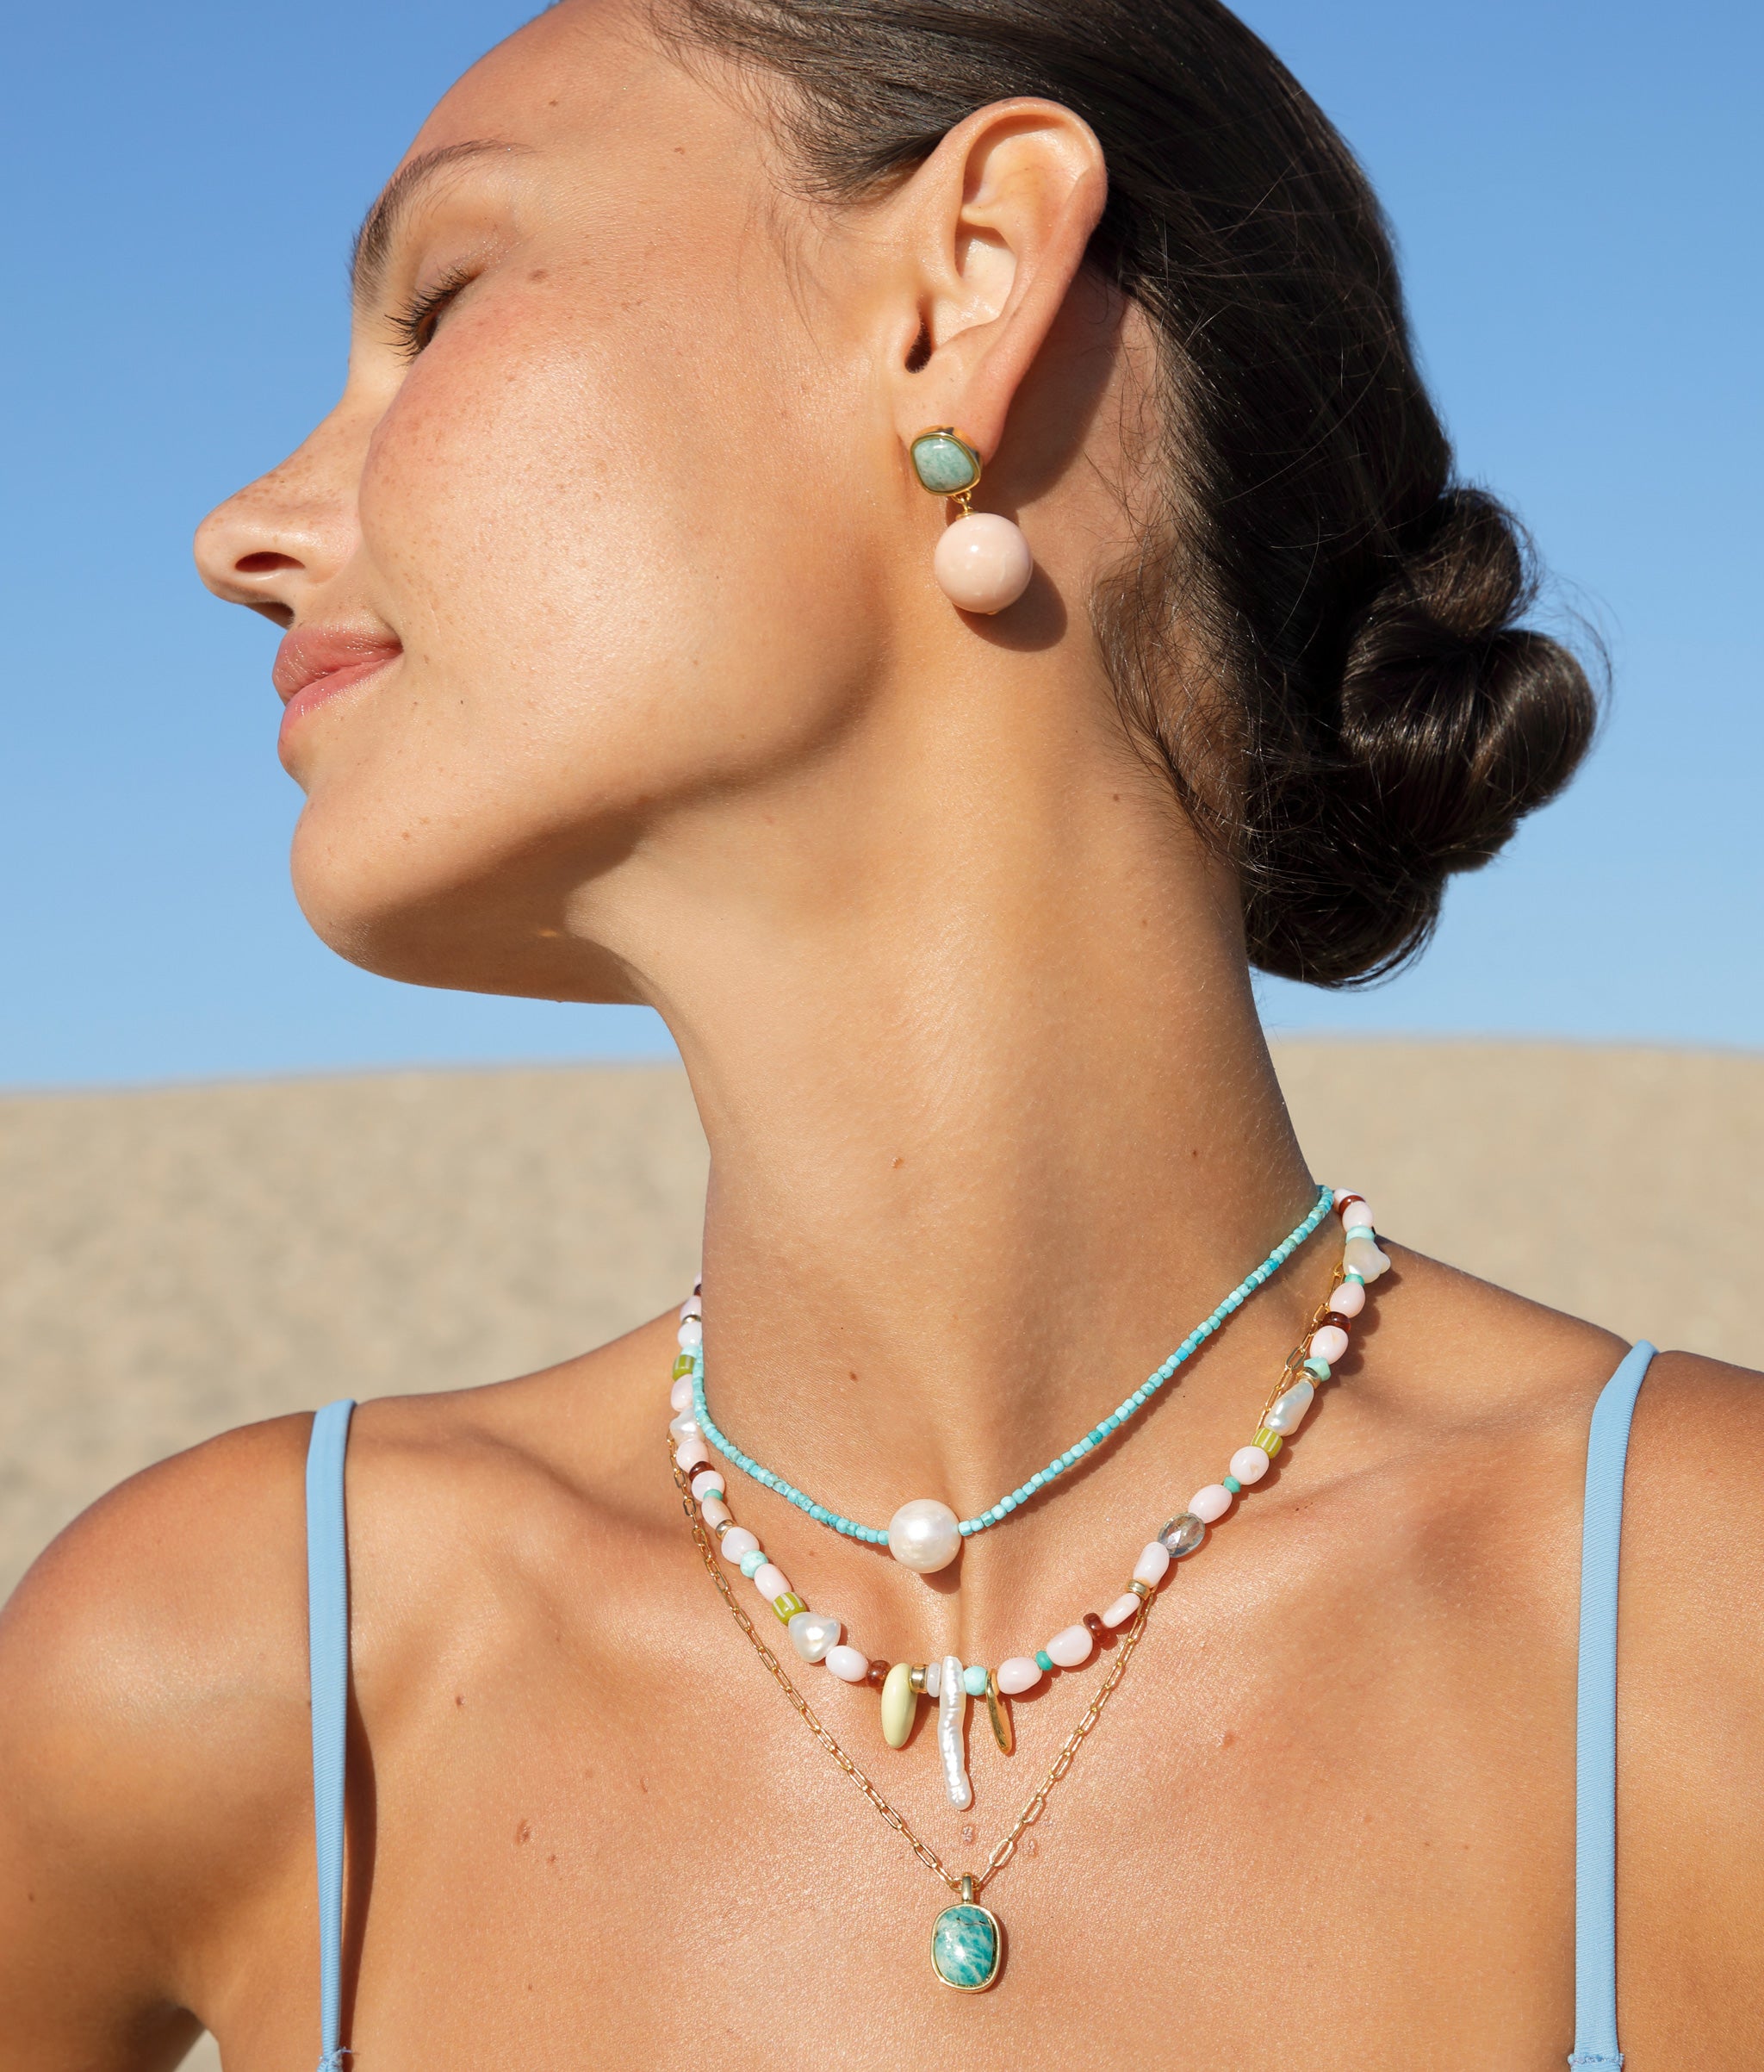 Model at the beach wearing the Rio Earrings in Blush with the Off Shore Necklace in Pink Sands.